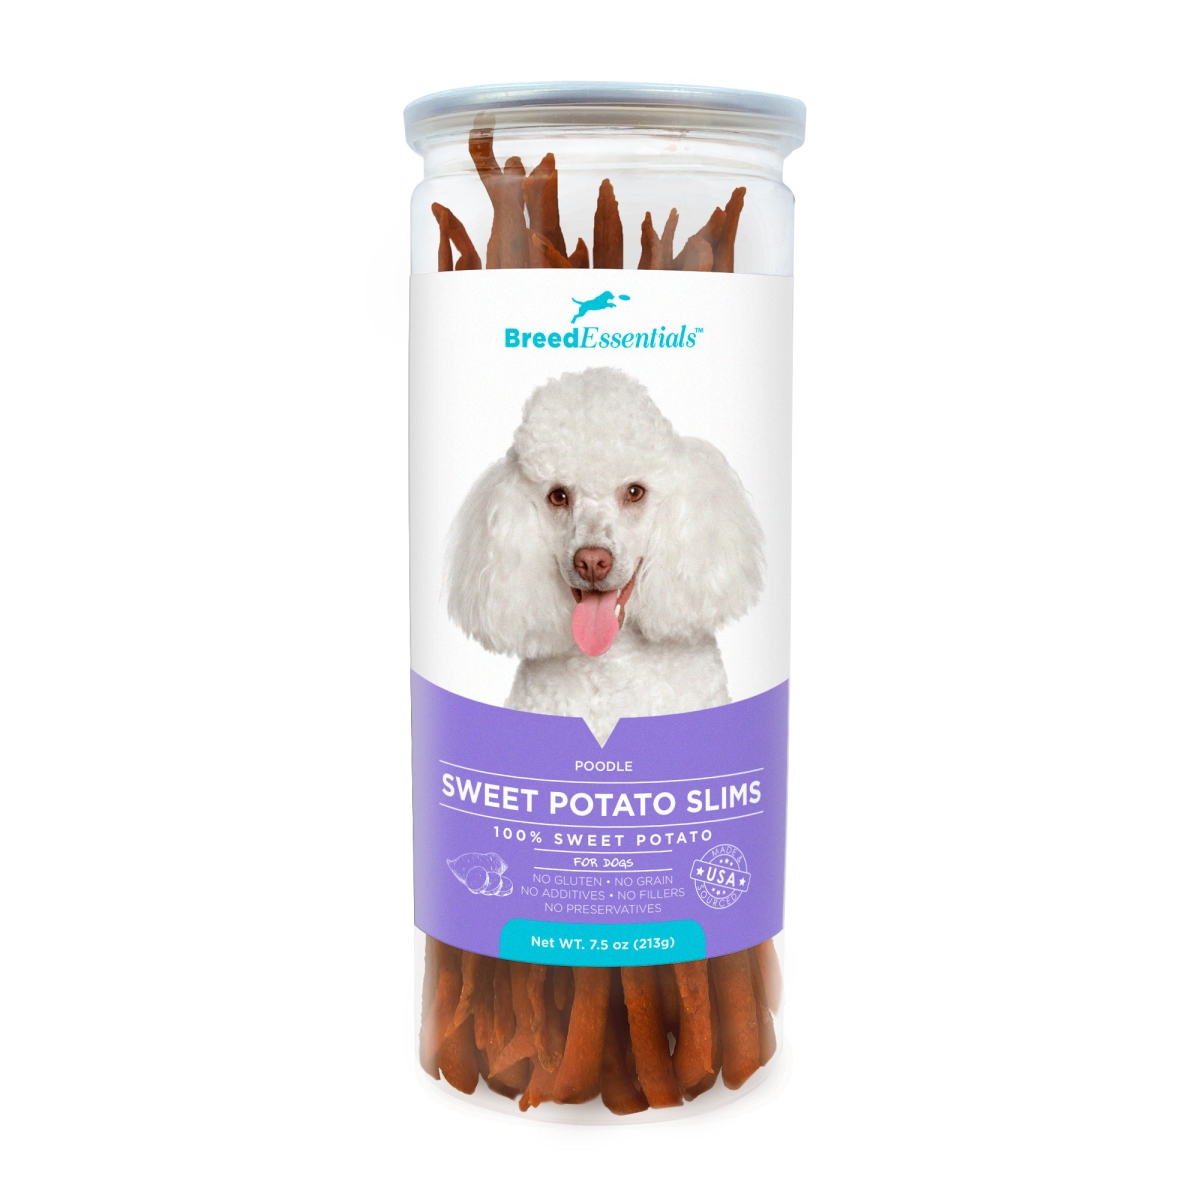 Picture of Breed Essentials 197247000358 7.5 oz Sweet Potato Slims - Poodle